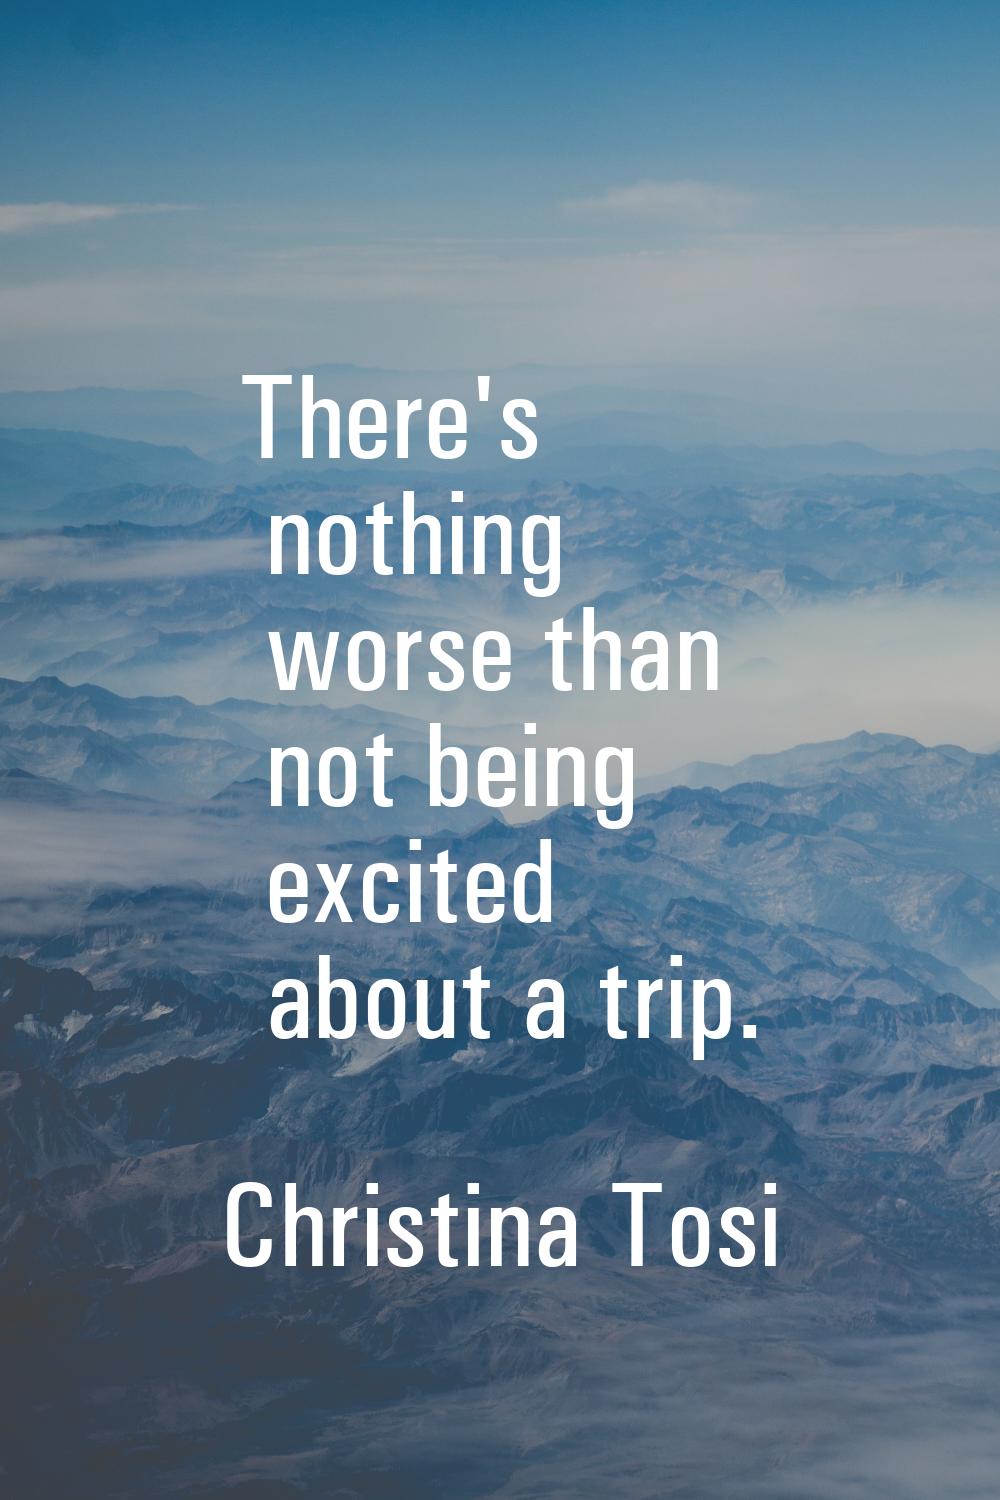 There's nothing worse than not being excited about a trip.